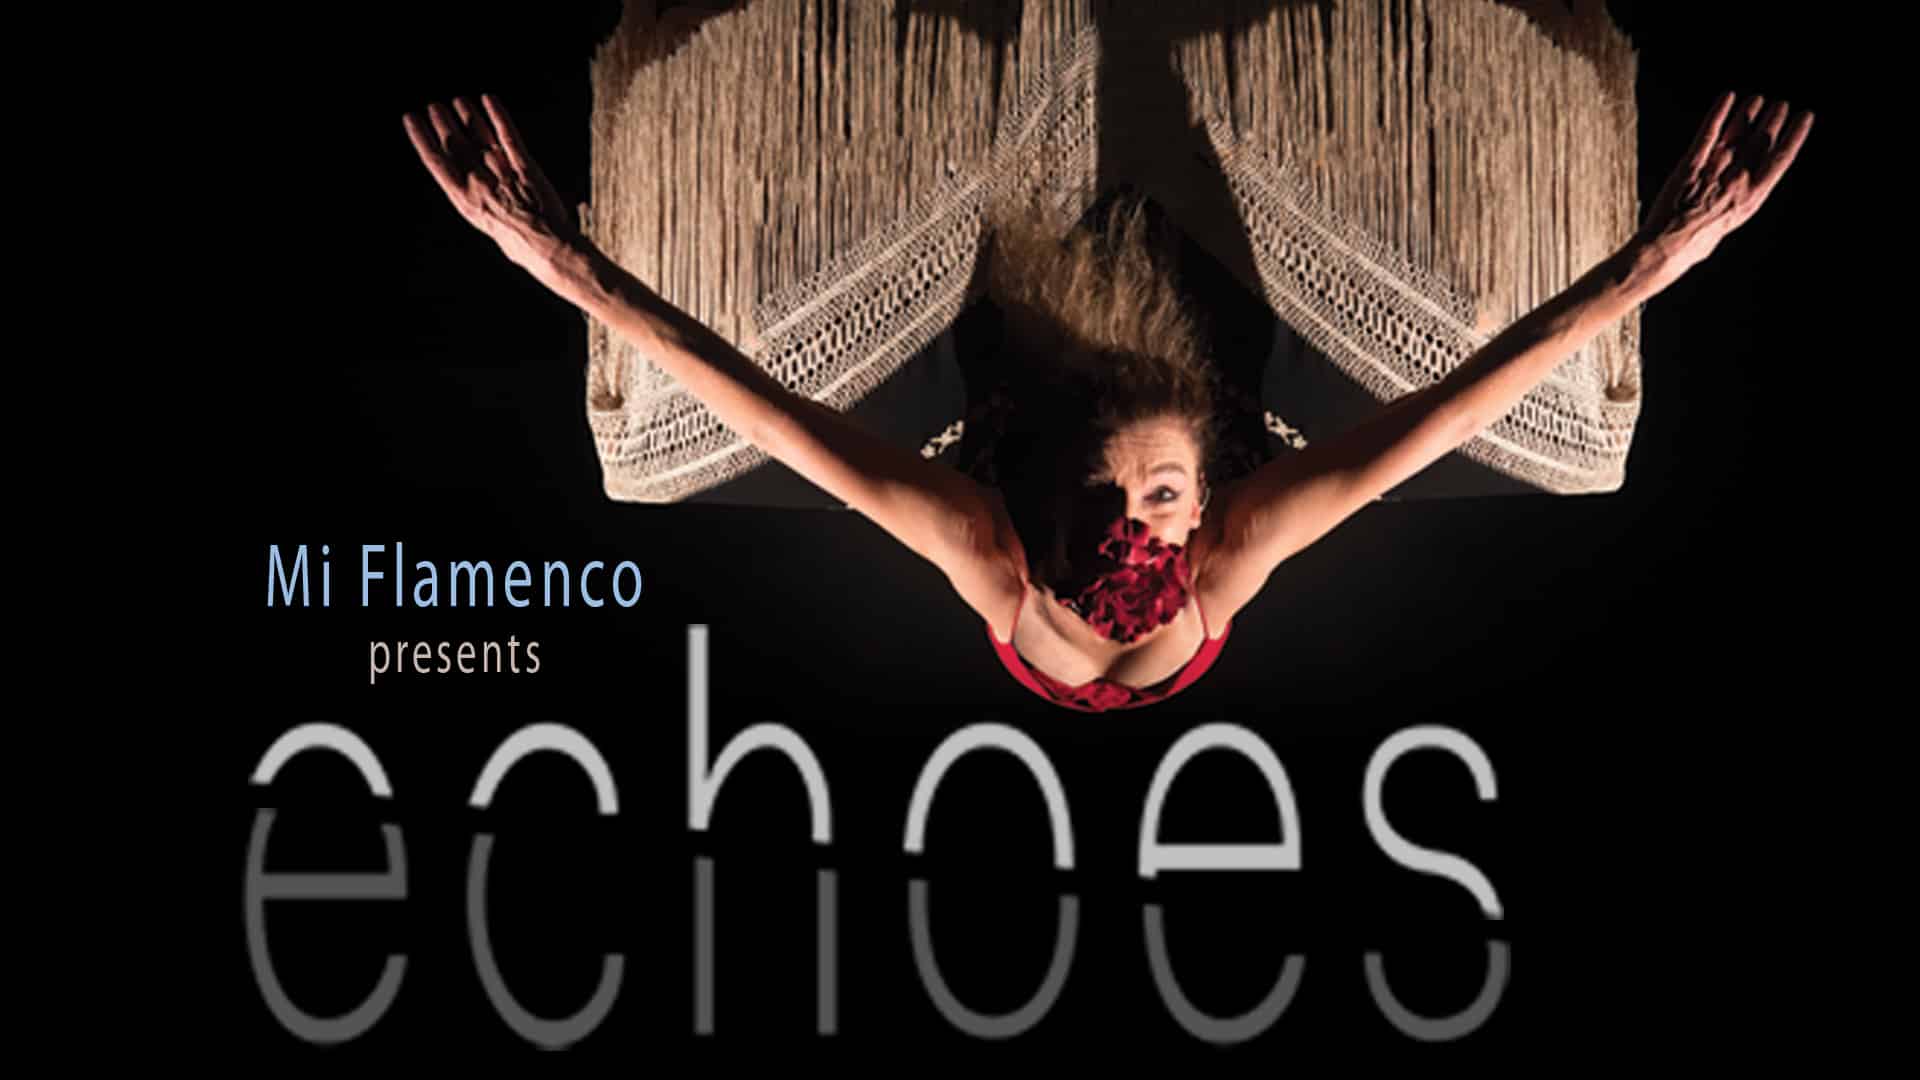 Black Background. Text reads: Echoes. A female dancer appears to be falling through the sky, arms spread like an elegant bird.